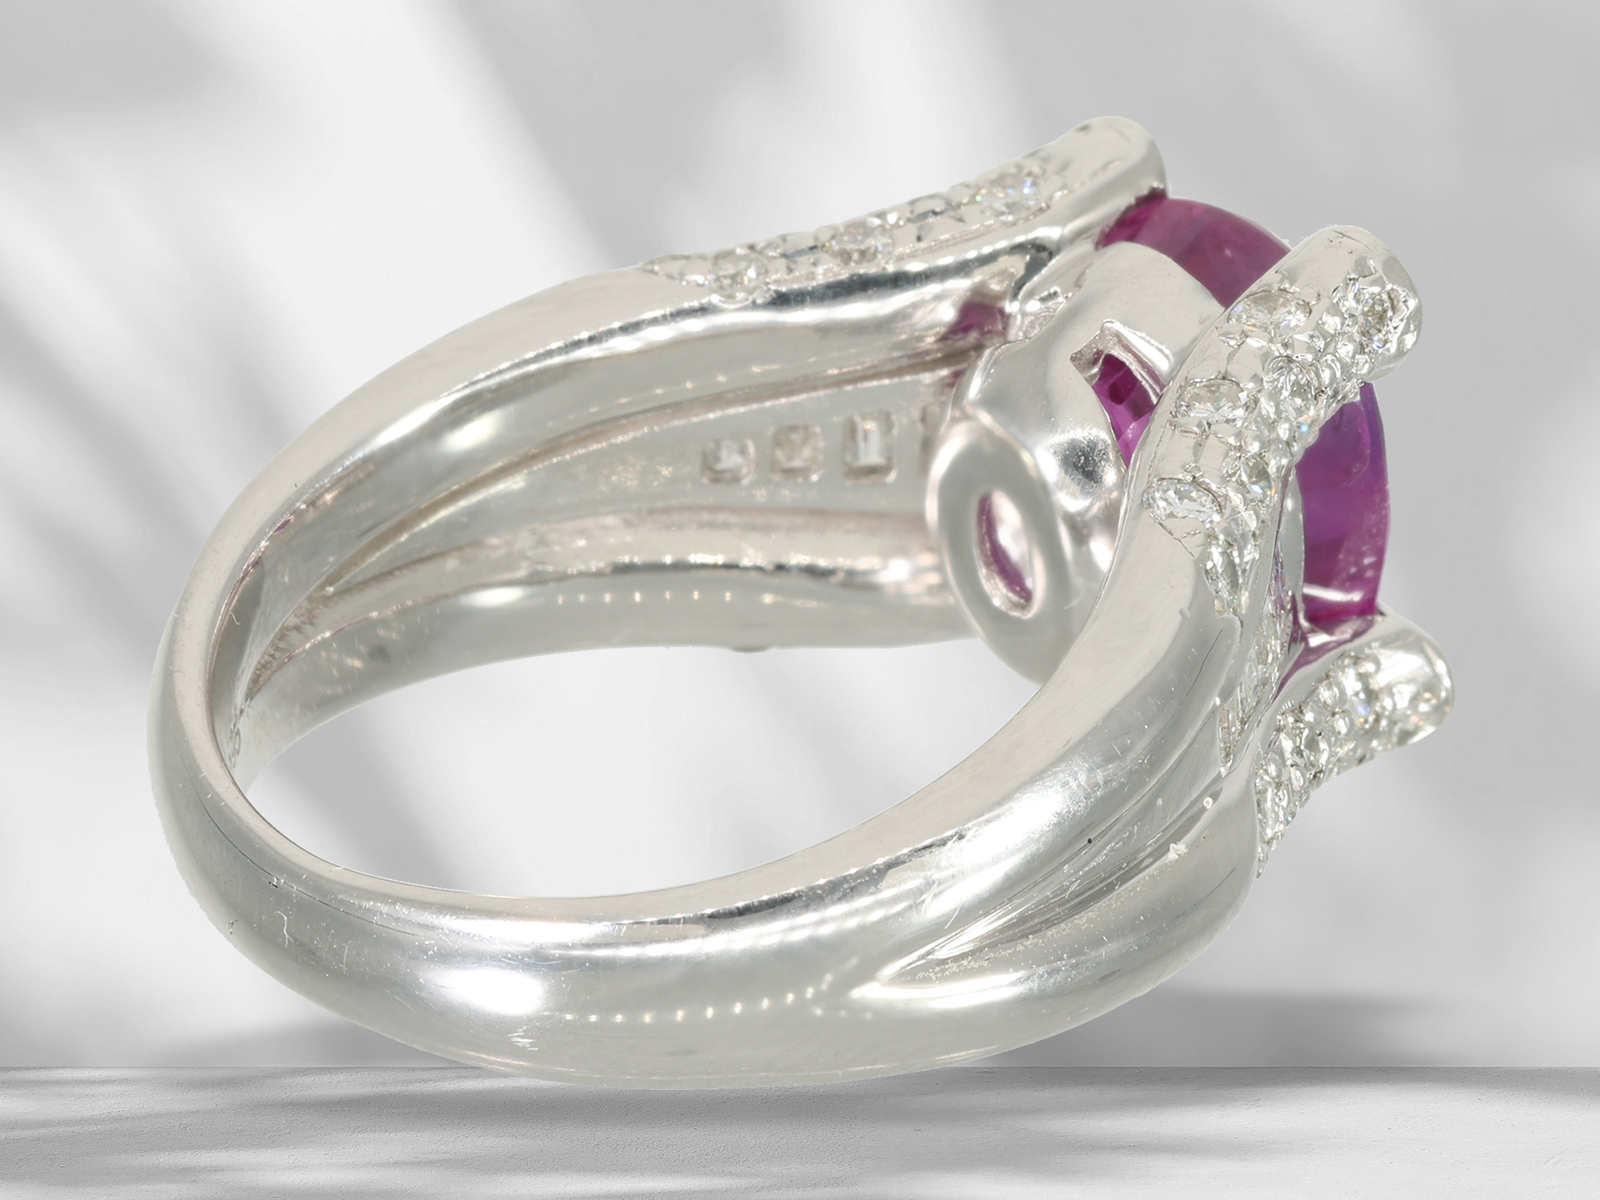 Ring: extremely valuable ruby/diamond ring, platinum, certified ruby of 4.77ct, GIA - Image 7 of 7